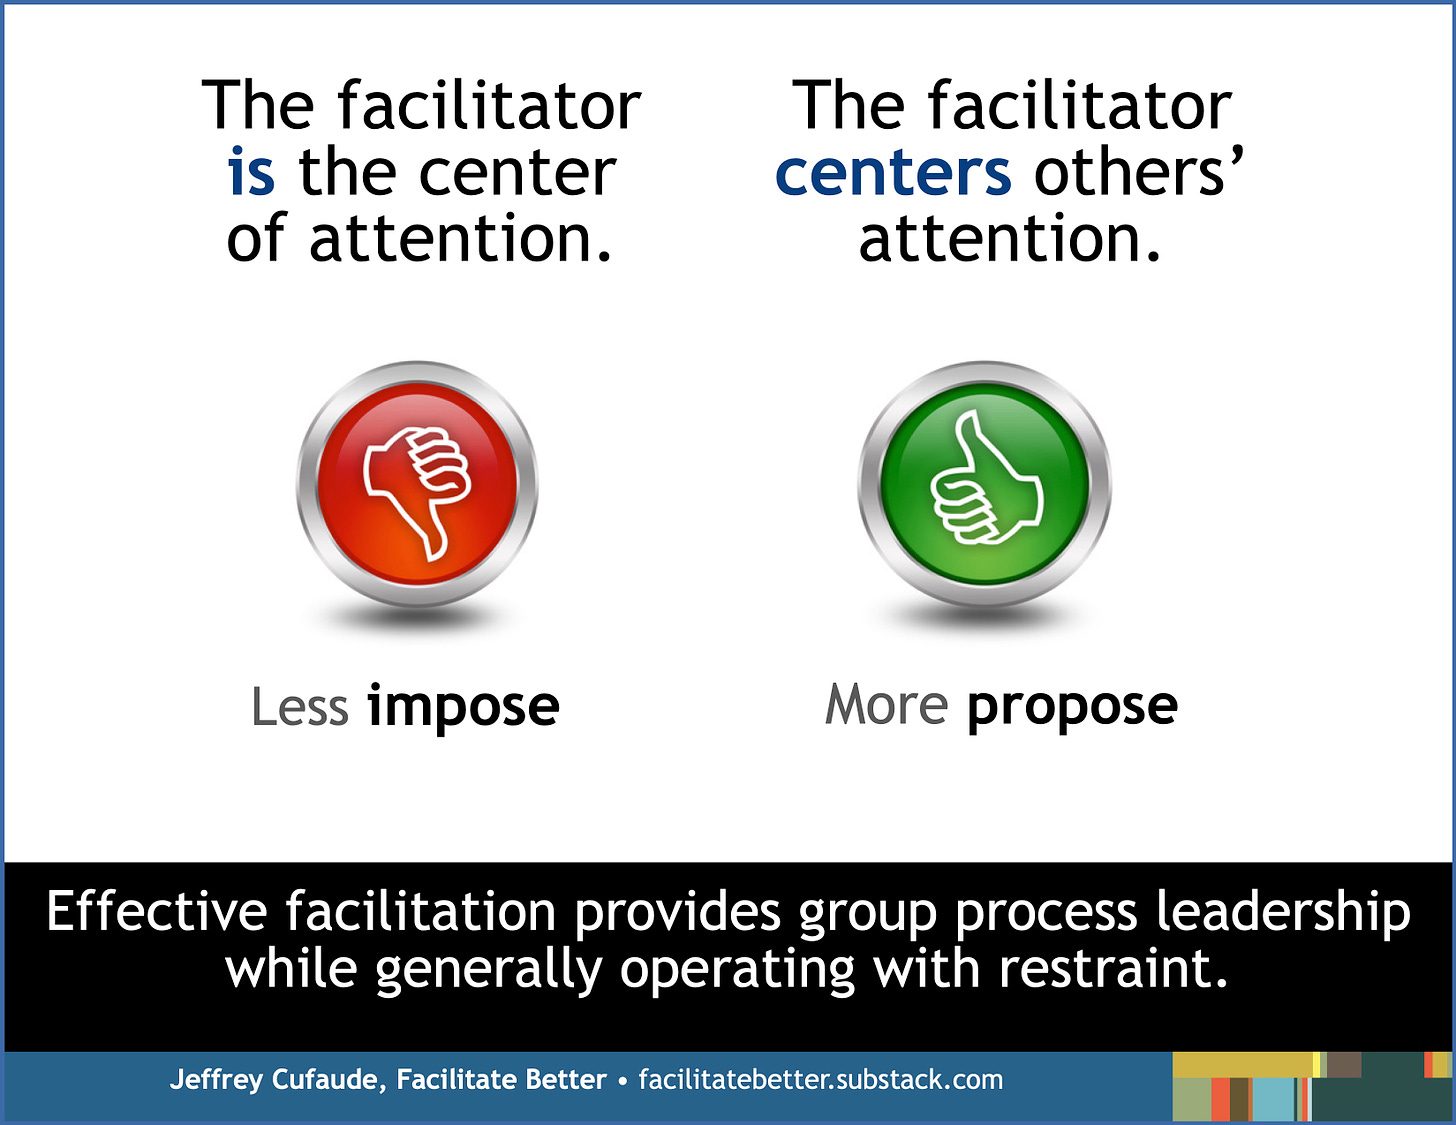 A red thumbs down button in the center of one column and a green thumbs up button in the other column.    Above the thumbs down button is the text “The facilitator is the center of attention.”   Above the green thumbs up button is the text “The facilitator centers others’ attention.”  Below the thumbs down button is the text “Less impose”  Below the green thumbs up button is the text “More propose”